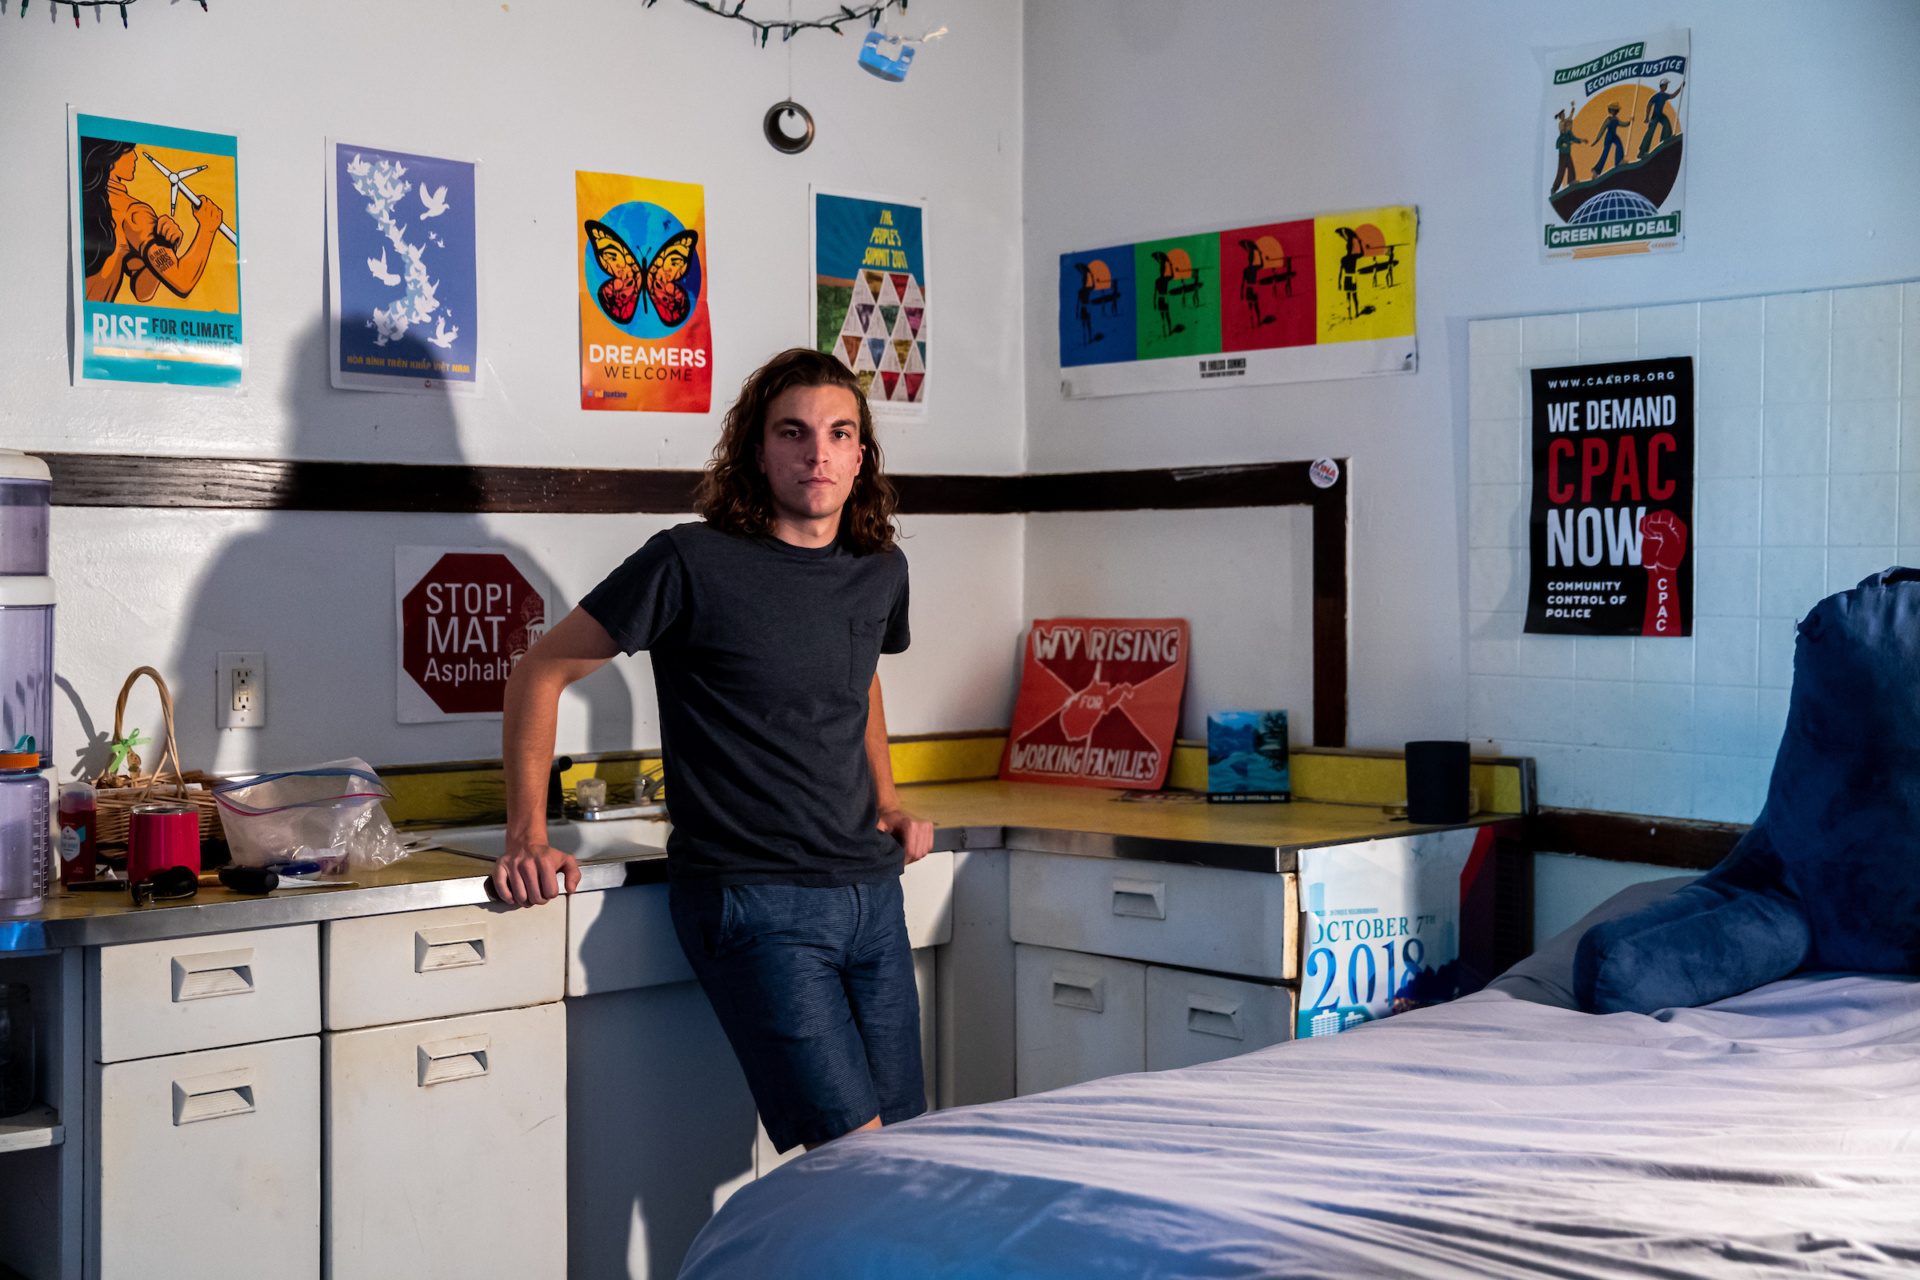 A man with shoulder-length hair leans against a counter in a small apartment with colorful posters on the walls